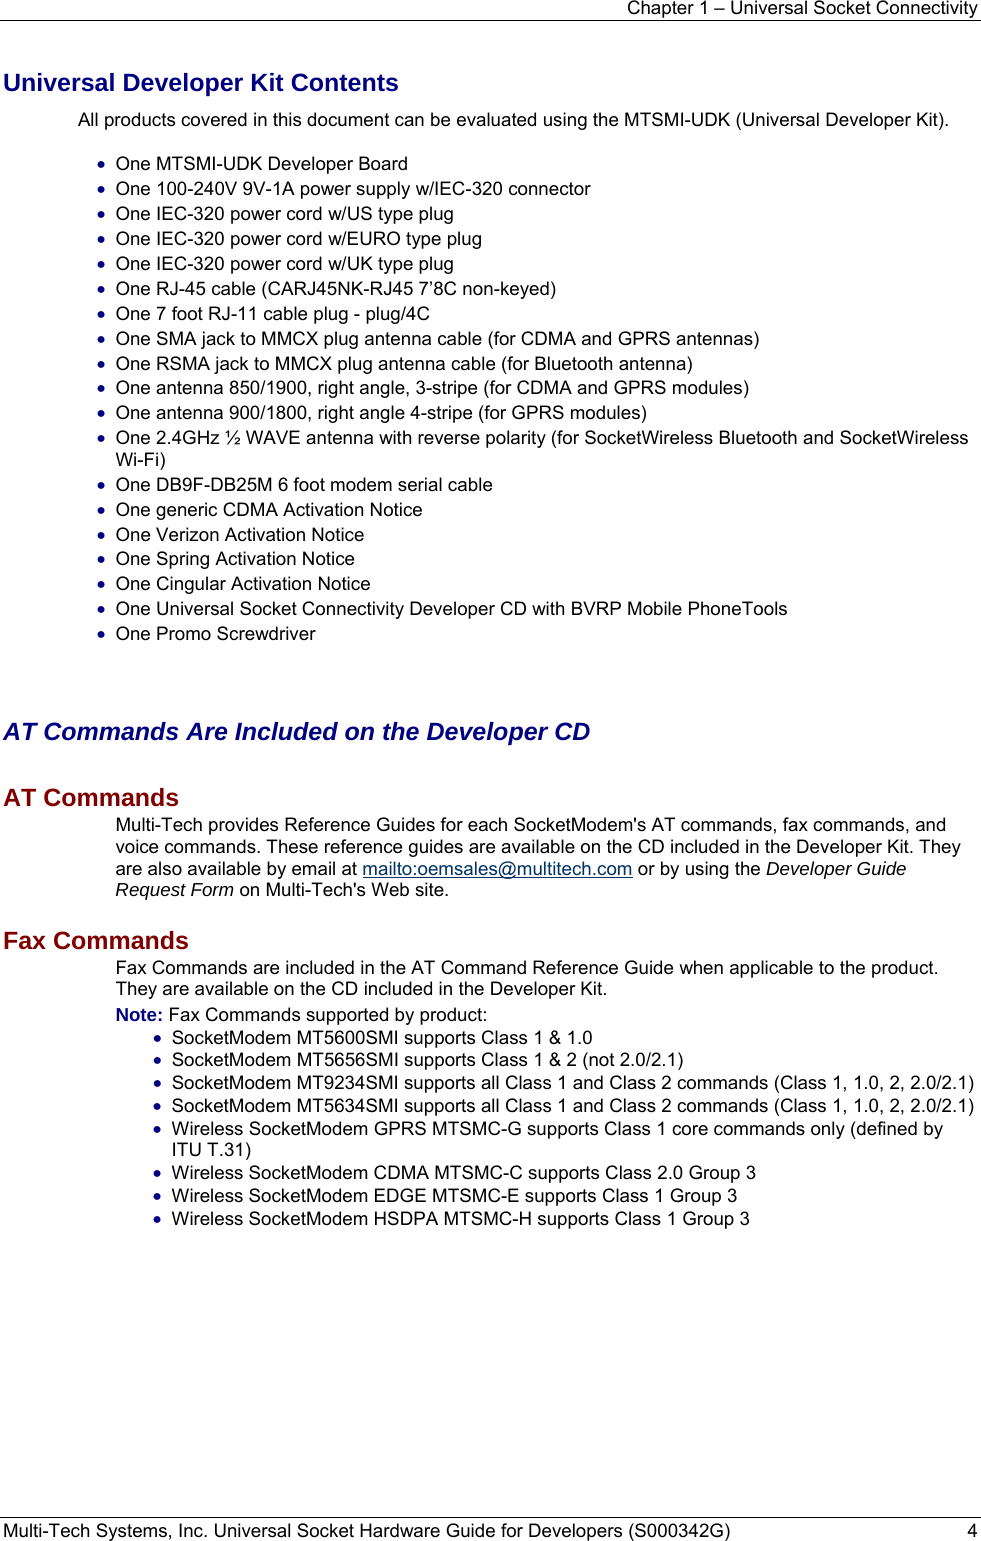 Chapter 1 – Universal Socket Connectivity Multi-Tech Systems, Inc. Universal Socket Hardware Guide for Developers (S000342G)  4  Universal Developer Kit Contents All products covered in this document can be evaluated using the MTSMI-UDK (Universal Developer Kit).  • One MTSMI-UDK Developer Board • One 100-240V 9V-1A power supply w/IEC-320 connector • One IEC-320 power cord w/US type plug • One IEC-320 power cord w/EURO type plug • One IEC-320 power cord w/UK type plug • One RJ-45 cable (CARJ45NK-RJ45 7’8C non-keyed) • One 7 foot RJ-11 cable plug - plug/4C • One SMA jack to MMCX plug antenna cable (for CDMA and GPRS antennas) • One RSMA jack to MMCX plug antenna cable (for Bluetooth antenna) • One antenna 850/1900, right angle, 3-stripe (for CDMA and GPRS modules) • One antenna 900/1800, right angle 4-stripe (for GPRS modules) • One 2.4GHz ½ WAVE antenna with reverse polarity (for SocketWireless Bluetooth and SocketWireless Wi-Fi) • One DB9F-DB25M 6 foot modem serial cable • One generic CDMA Activation Notice • One Verizon Activation Notice     • One Spring Activation Notice              • One Cingular Activation Notice • One Universal Socket Connectivity Developer CD with BVRP Mobile PhoneTools • One Promo Screwdriver     AT Commands Are Included on the Developer CD AT Commands  Multi-Tech provides Reference Guides for each SocketModem&apos;s AT commands, fax commands, and voice commands. These reference guides are available on the CD included in the Developer Kit. They are also available by email at mailto:oemsales@multitech.com or by using the Developer Guide Request Form on Multi-Tech&apos;s Web site.  Fax Commands  Fax Commands are included in the AT Command Reference Guide when applicable to the product. They are available on the CD included in the Developer Kit.   Note: Fax Commands supported by product:  • SocketModem MT5600SMI supports Class 1 &amp; 1.0  • SocketModem MT5656SMI supports Class 1 &amp; 2 (not 2.0/2.1) • SocketModem MT9234SMI supports all Class 1 and Class 2 commands (Class 1, 1.0, 2, 2.0/2.1) • SocketModem MT5634SMI supports all Class 1 and Class 2 commands (Class 1, 1.0, 2, 2.0/2.1) • Wireless SocketModem GPRS MTSMC-G supports Class 1 core commands only (defined by ITU T.31) • Wireless SocketModem CDMA MTSMC-C supports Class 2.0 Group 3 • Wireless SocketModem EDGE MTSMC-E supports Class 1 Group 3 • Wireless SocketModem HSDPA MTSMC-H supports Class 1 Group 3   